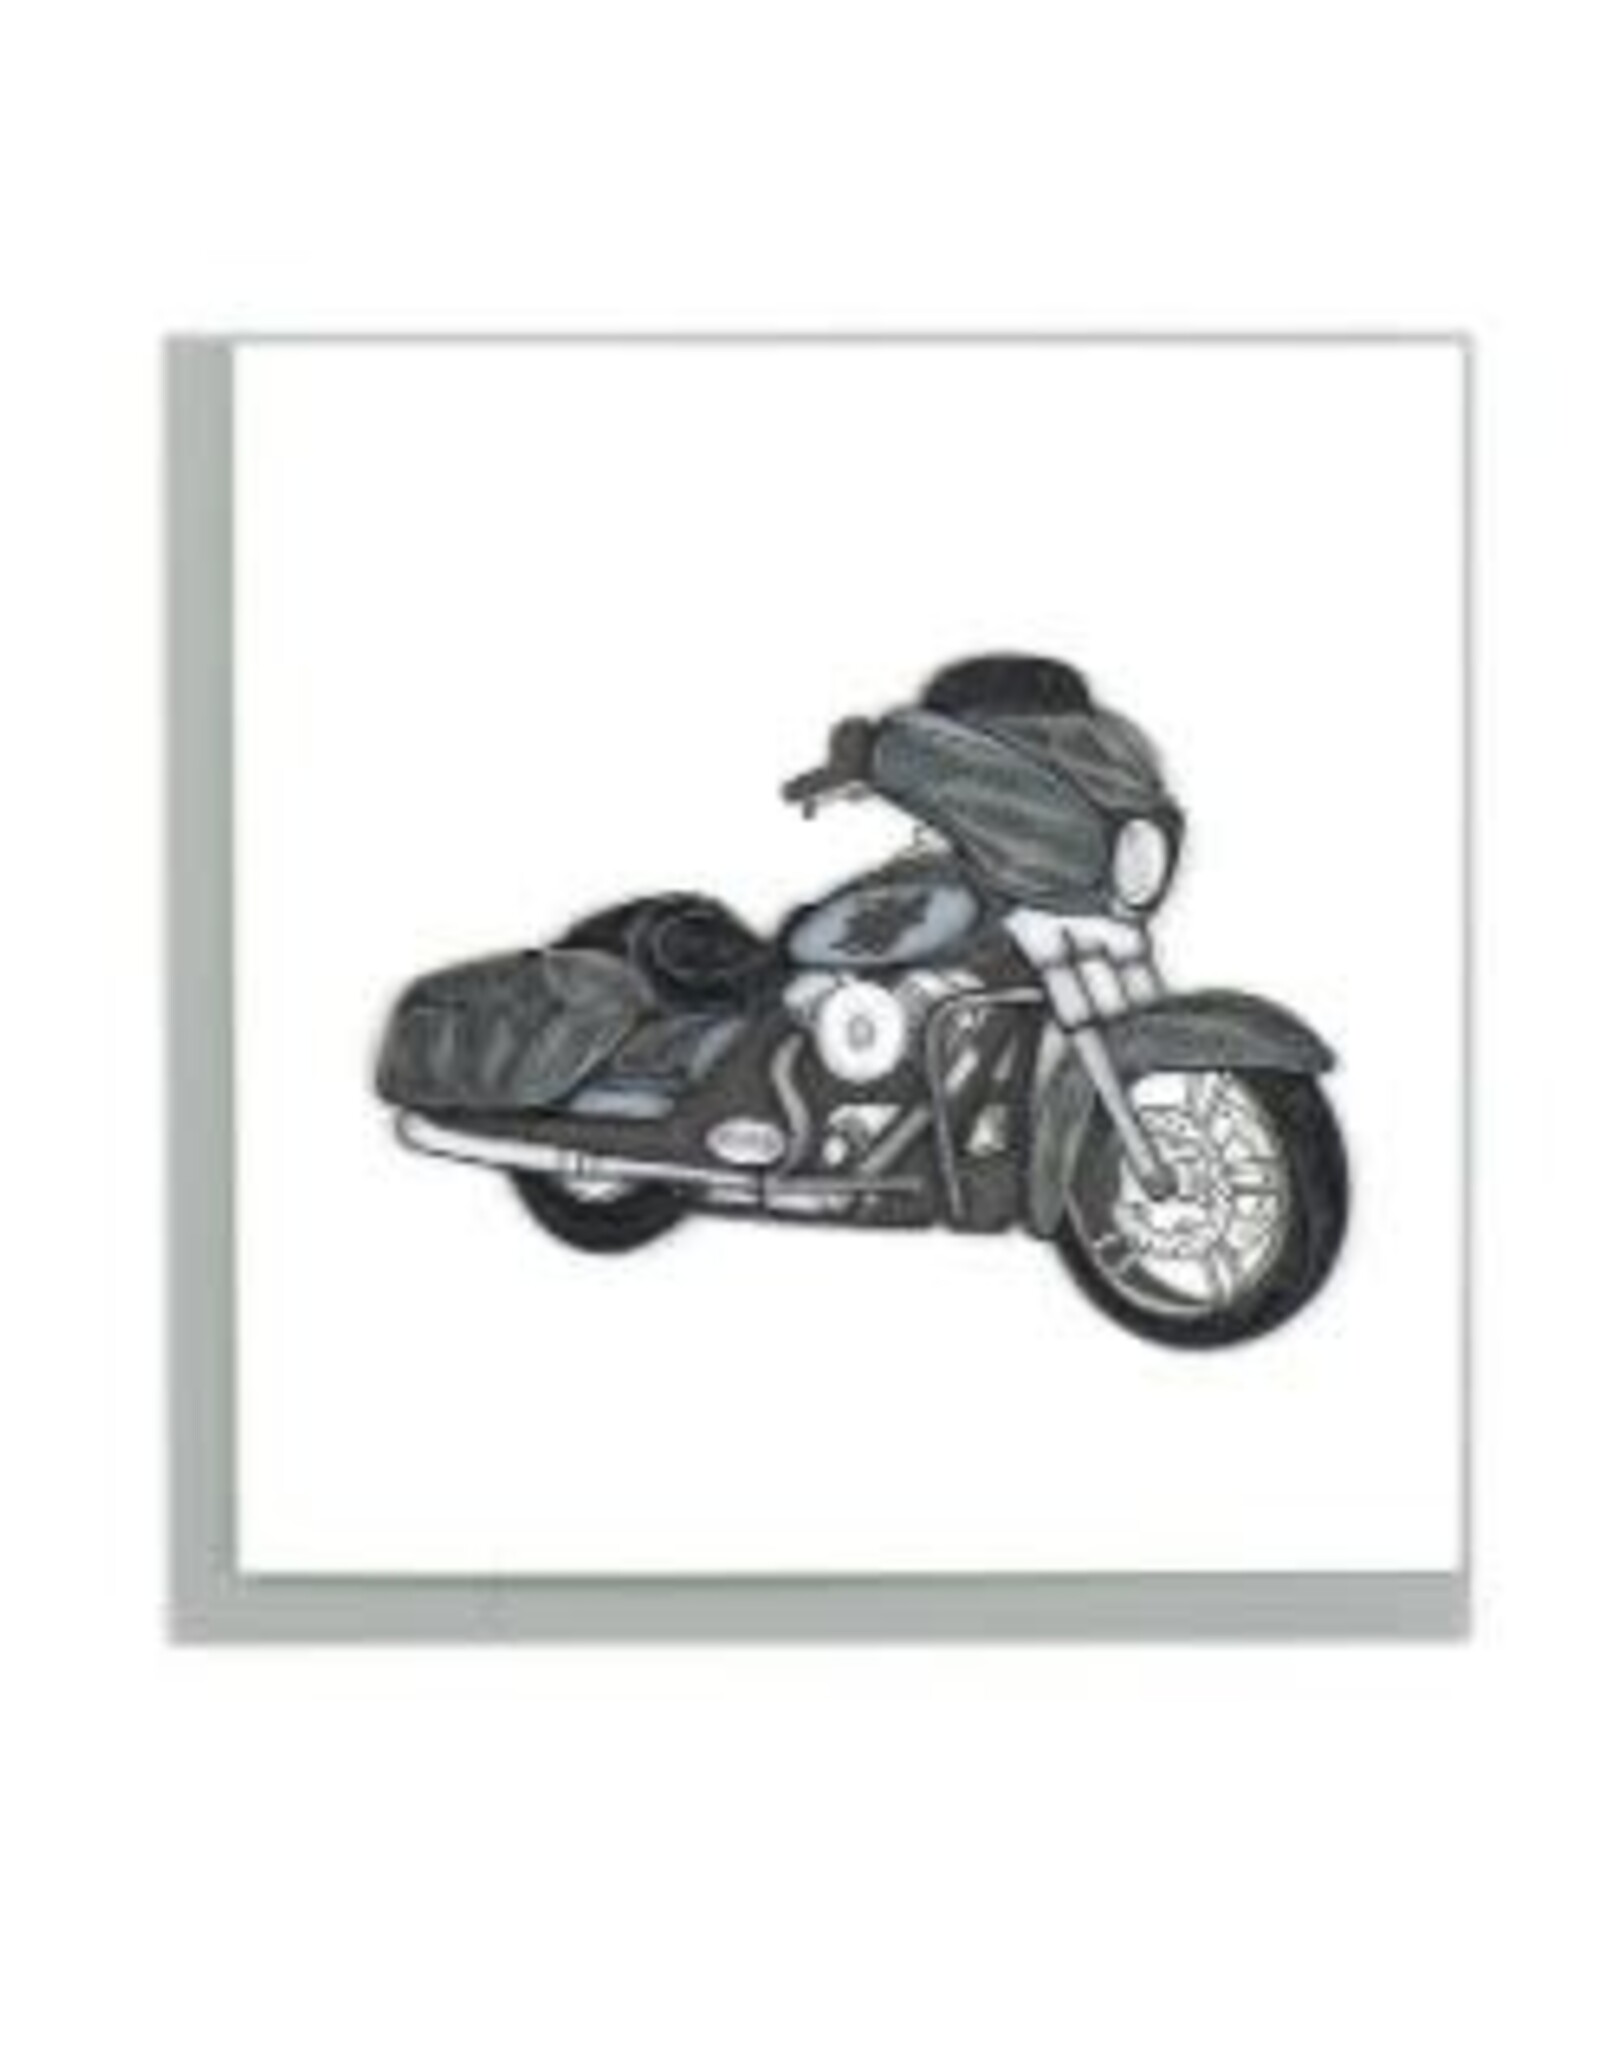 Quilling Card Lg- Motorcycle